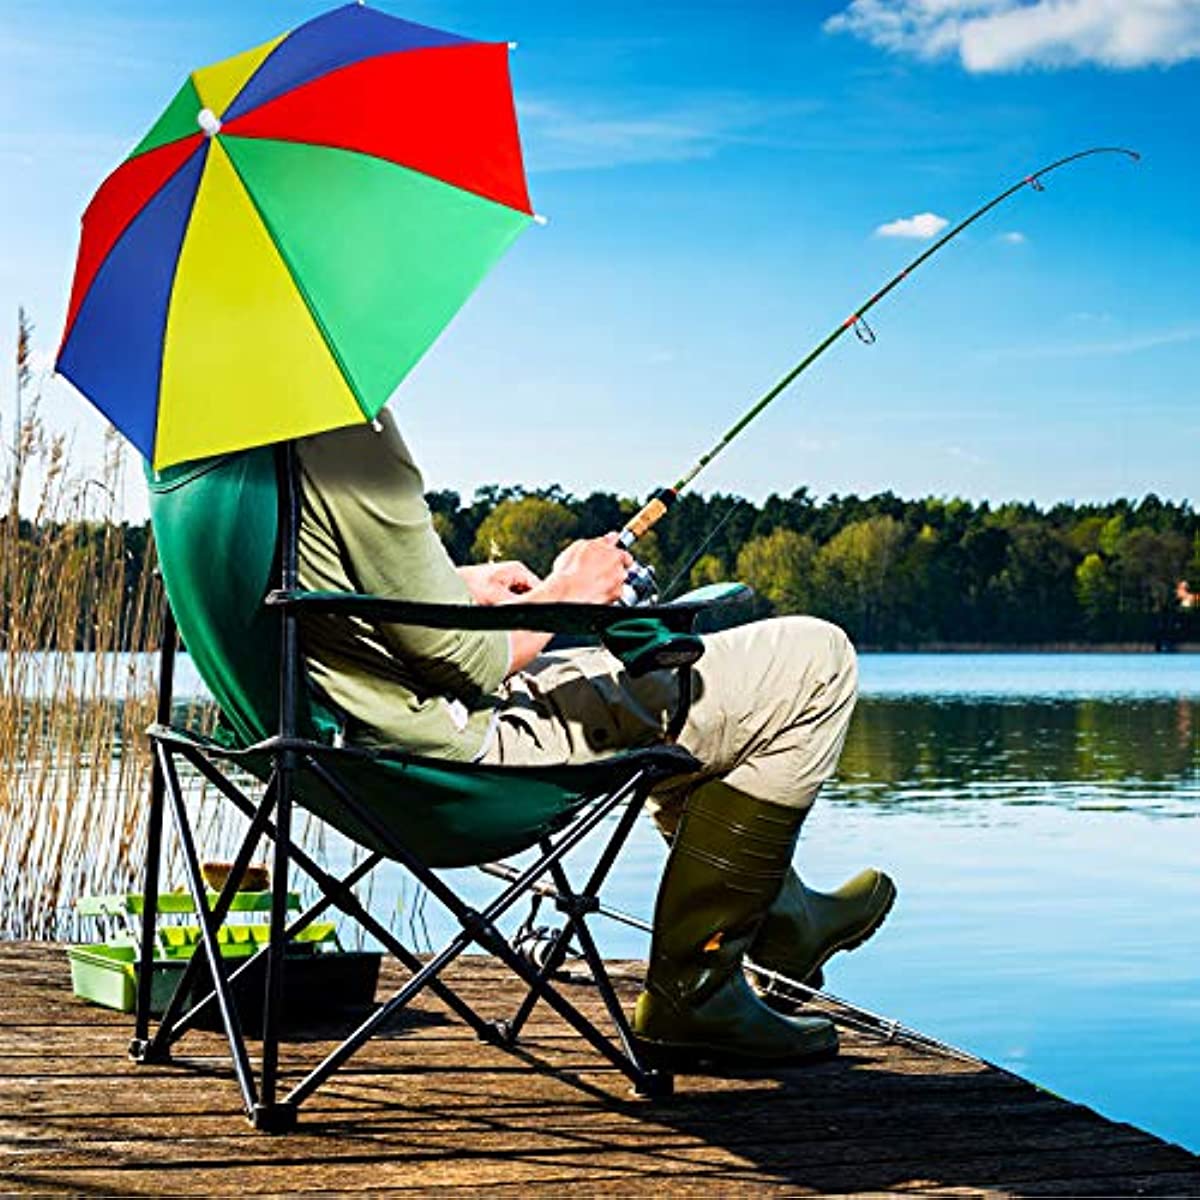 1pc Umbrella Hat for Adults Kids Waterproof Headwear Fishing Hats Colorful Beach Hats with Elastic Band for Outdoor Patio Hiking Fishing Walking